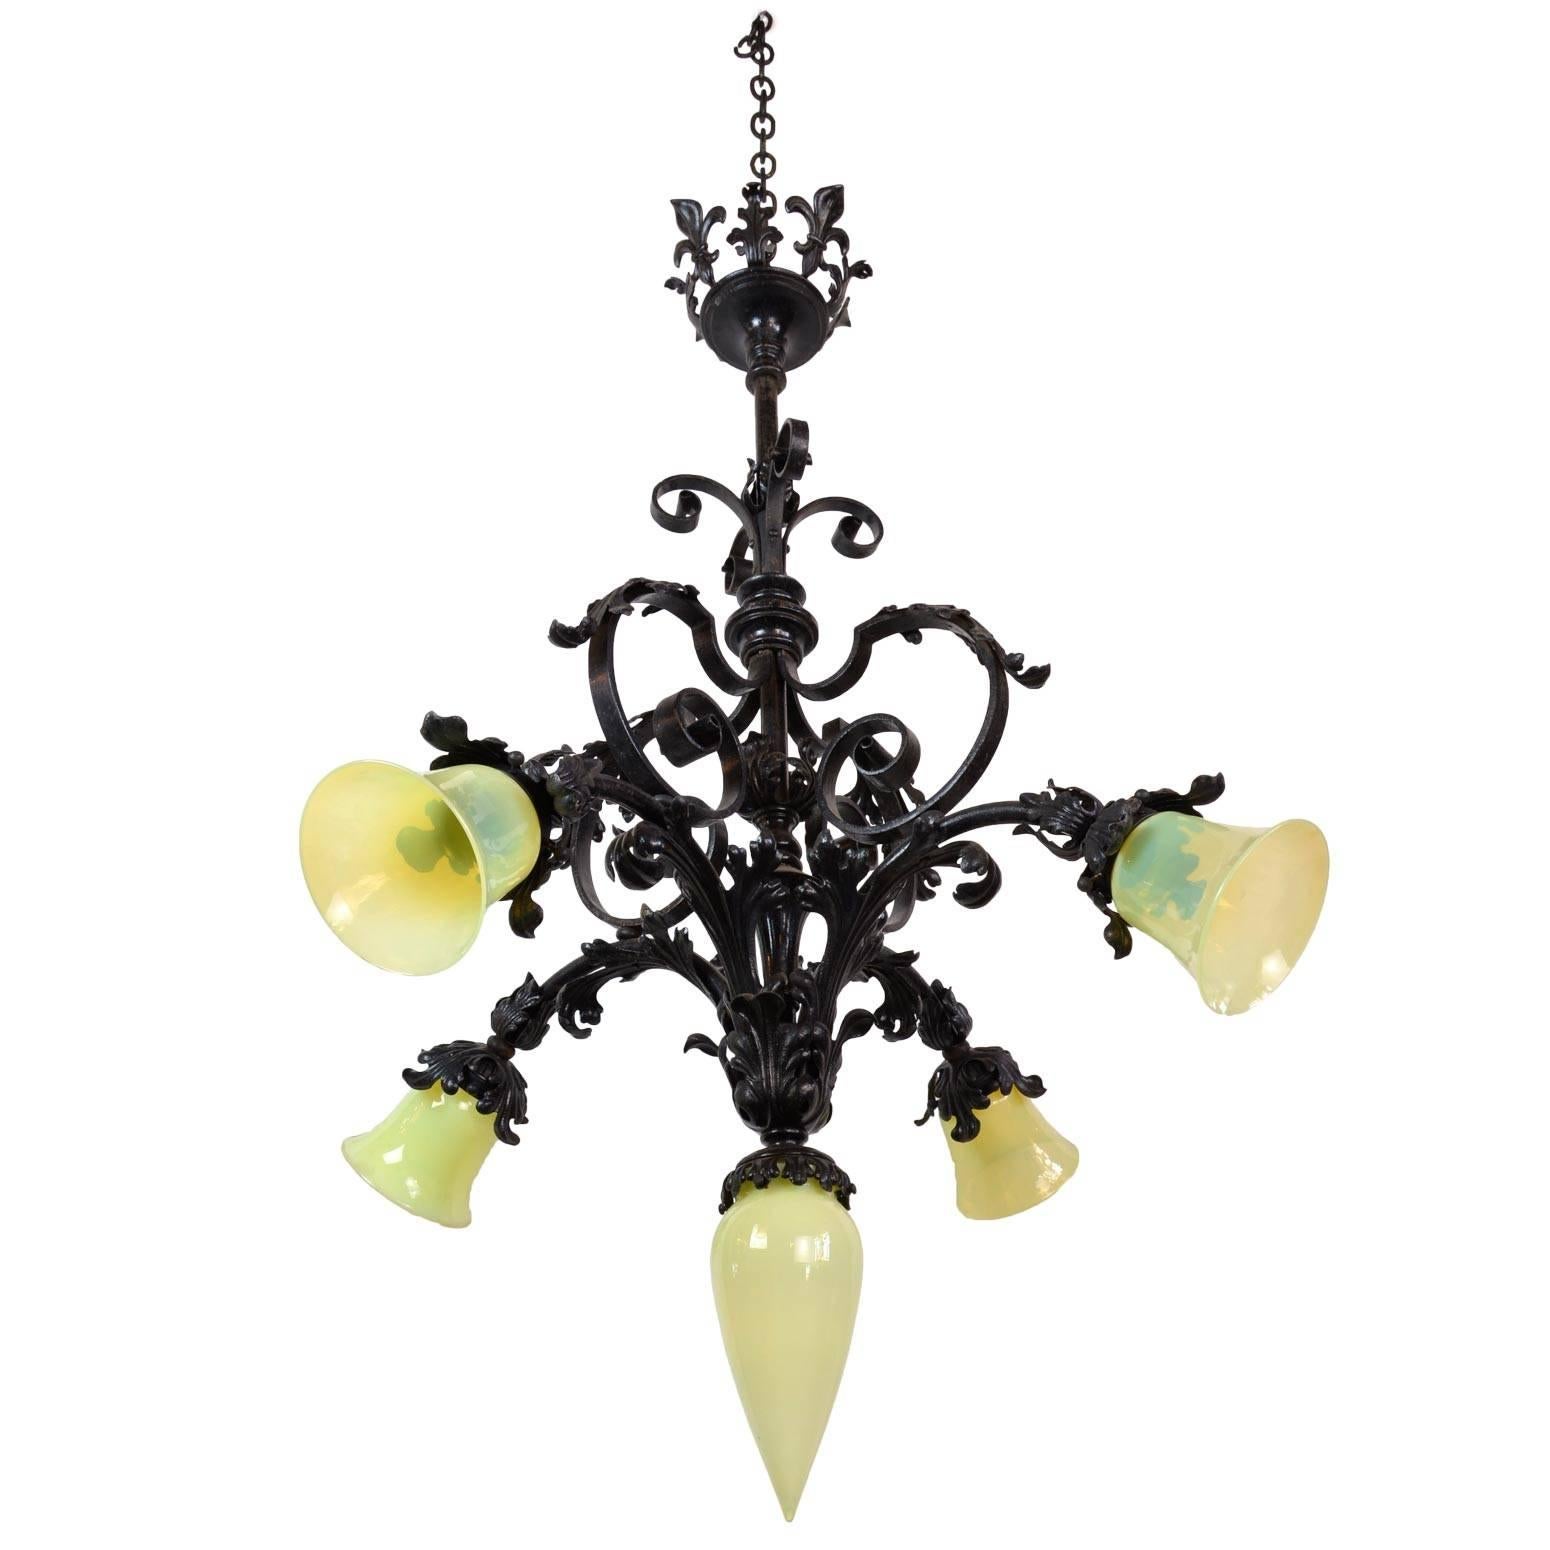 Made circa 1915, this iron chandelier has Gothic details, including scroll and leaf decoration as well as vaseline glass shades on each of the four arms and the center closed shade. A beautiful, ornate addition to a room in need of some historic